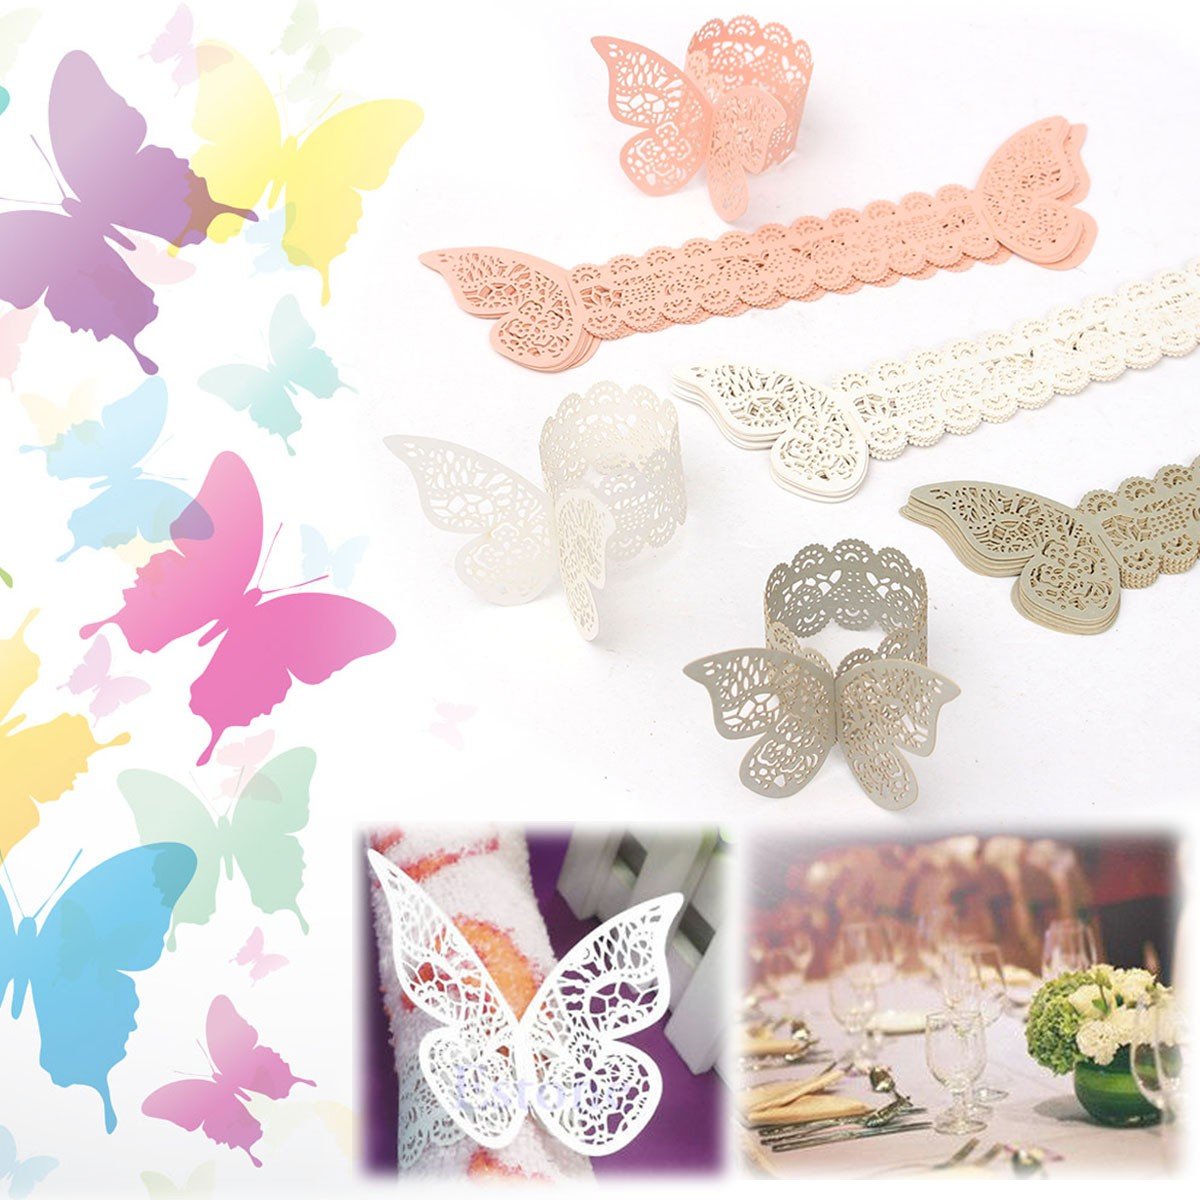 

12 Pcs Butterfly Hollow Out Paper Napkin Buckle Ring Wedding Party Anniversary Decoration, White pink silver